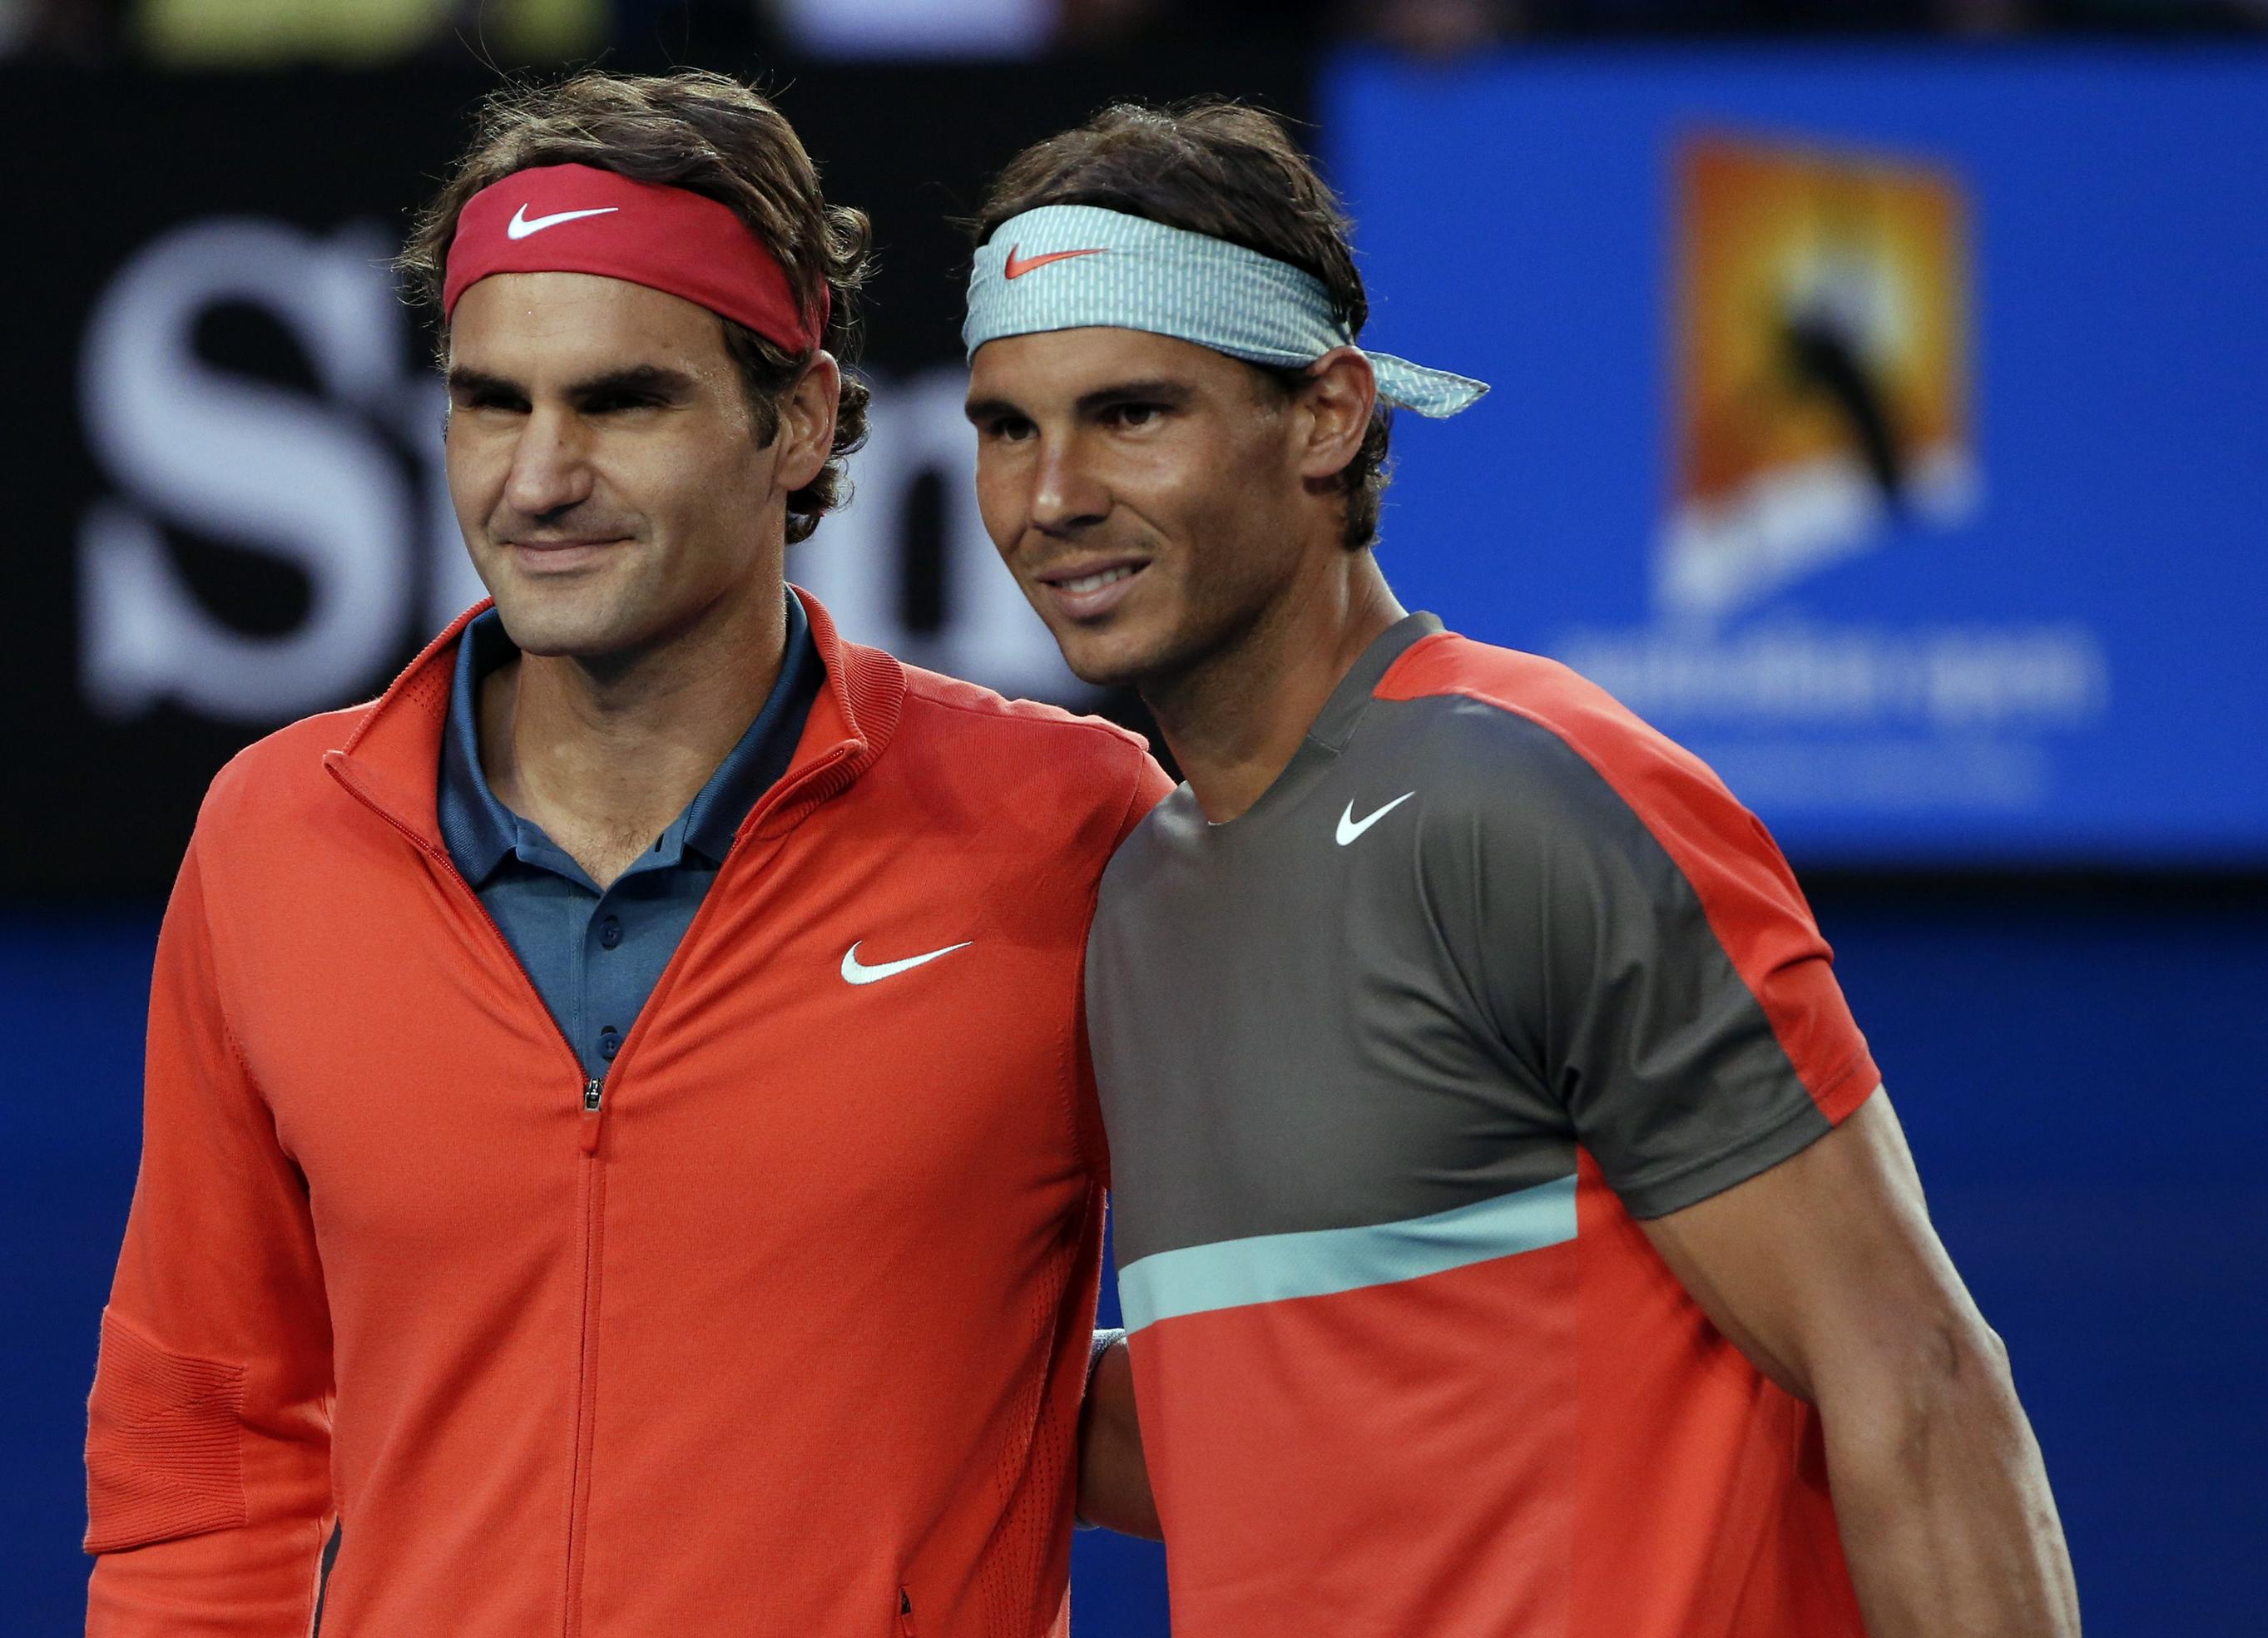 roger federer l poses for a photo with rafael nadal photo reuters